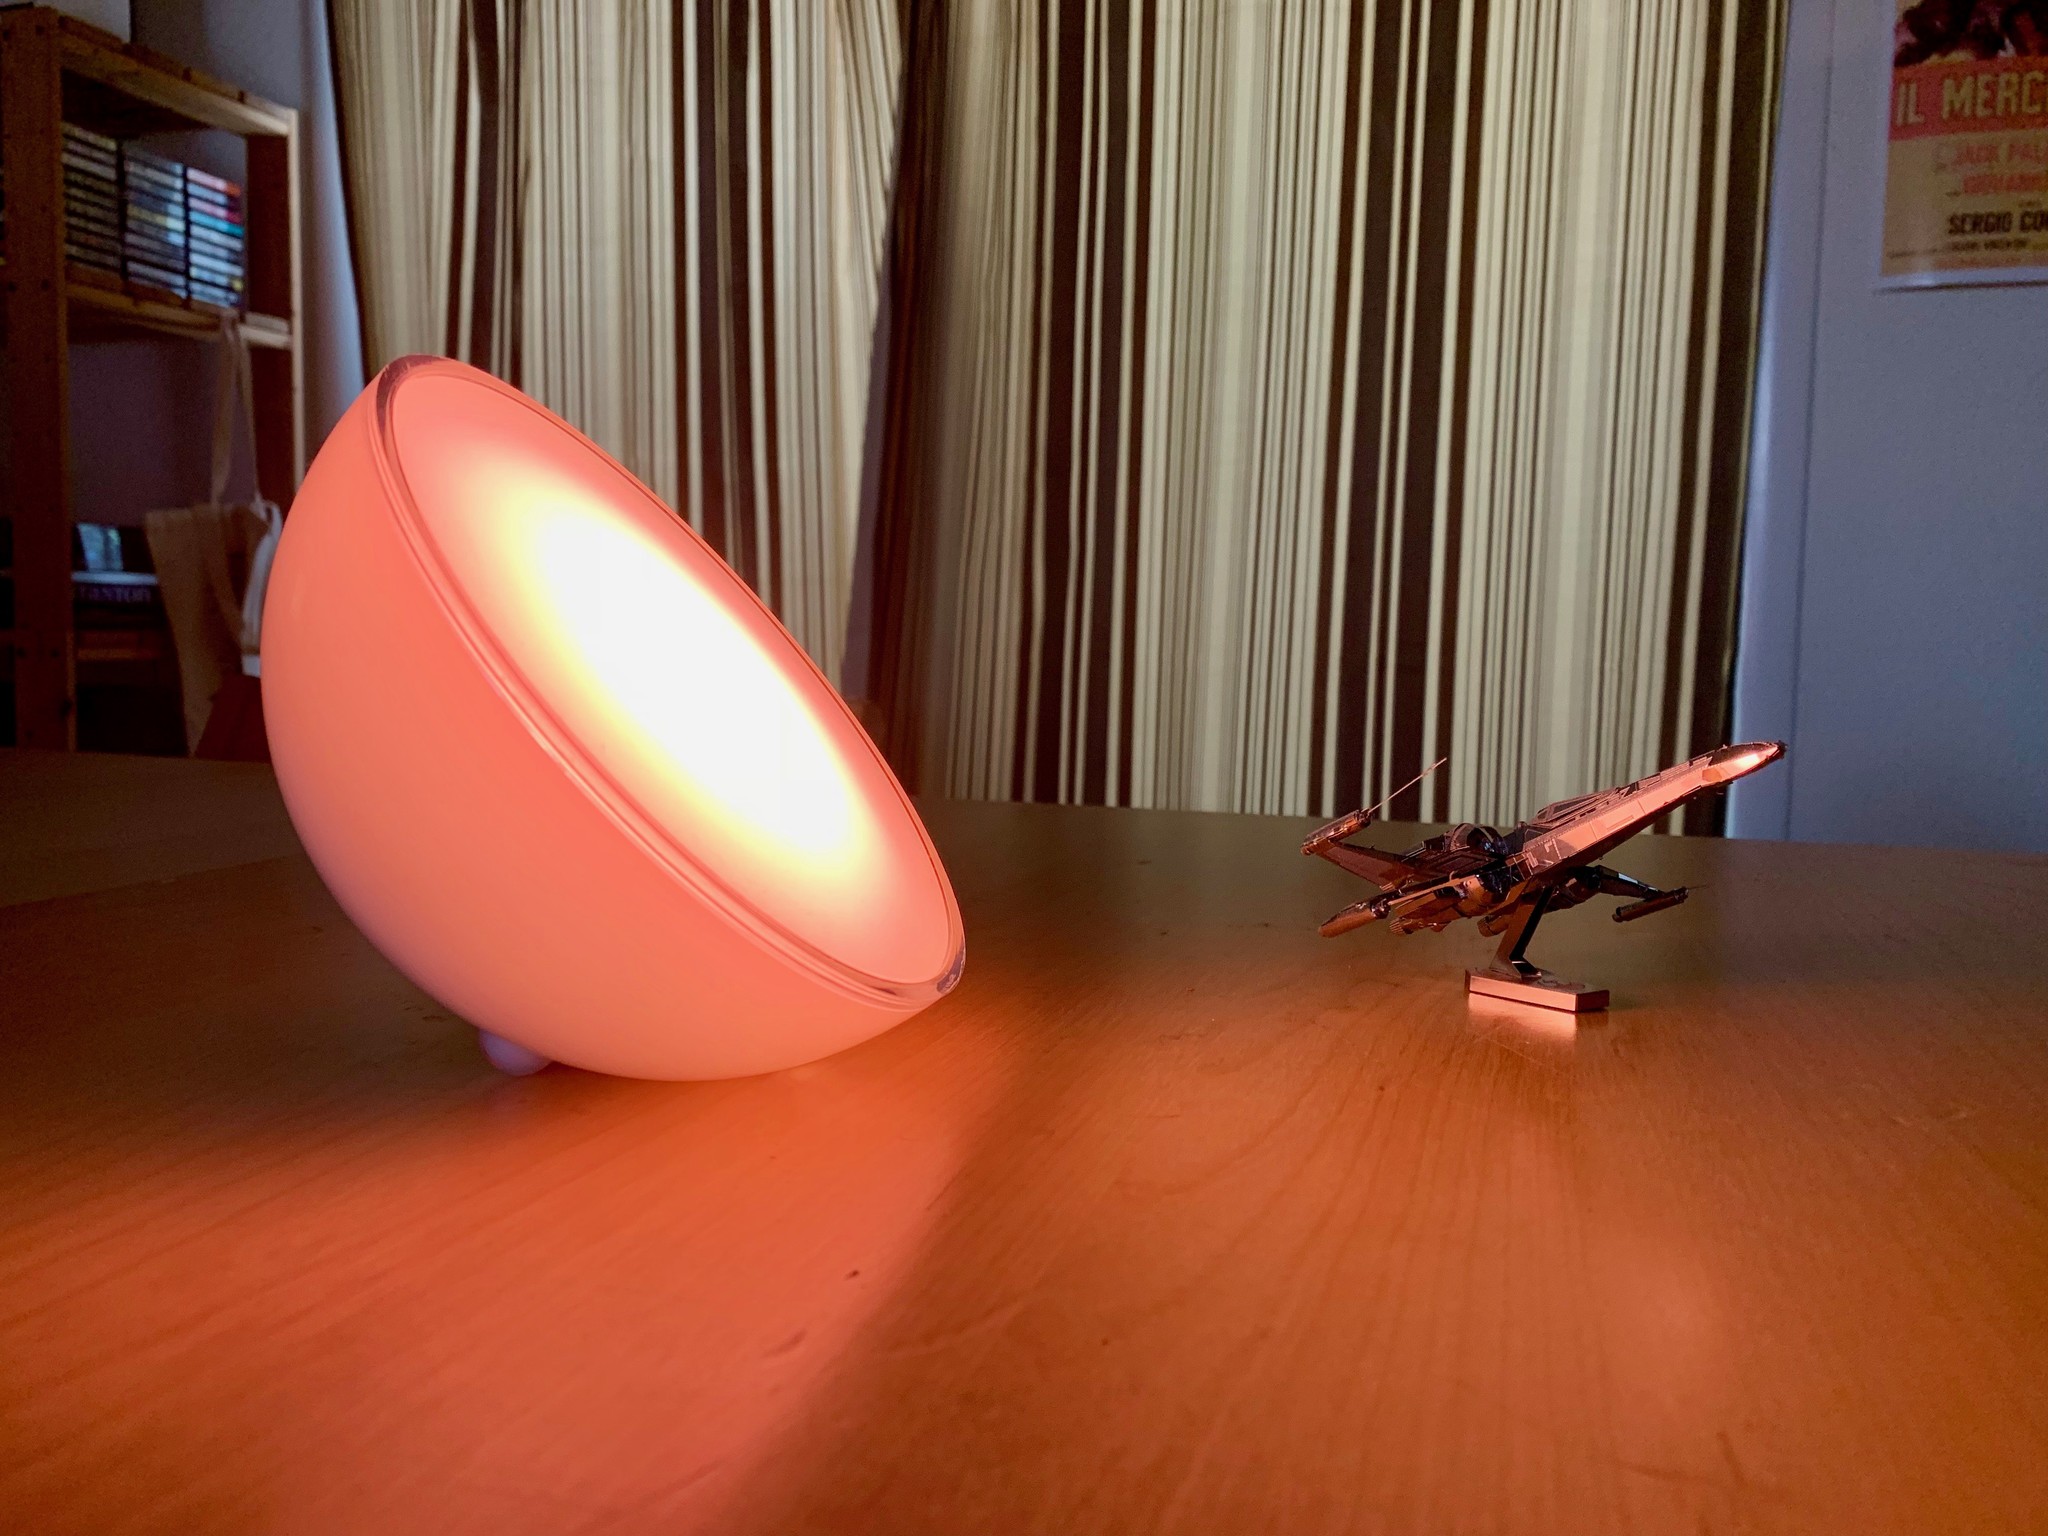 What colors come with the Philips Hue Go?